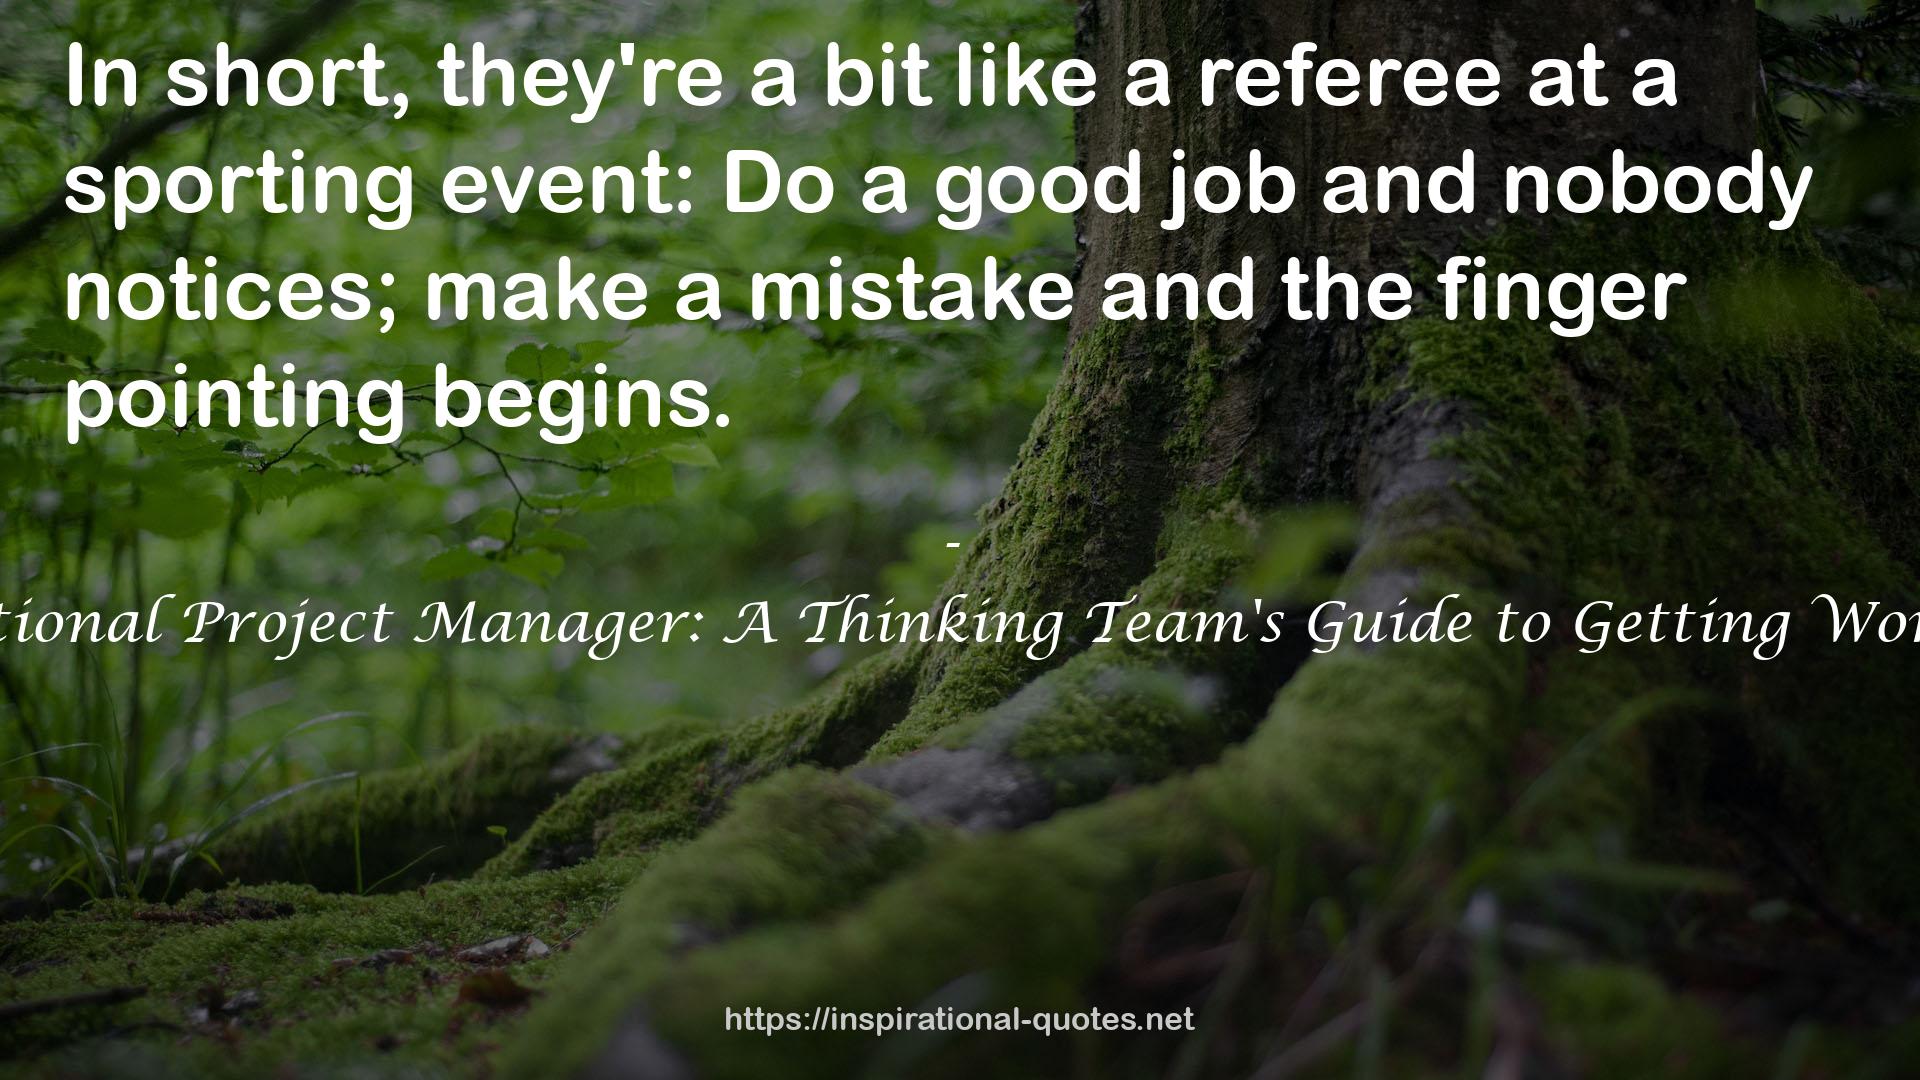 The Rational Project Manager: A Thinking Team's Guide to Getting Work Done QUOTES